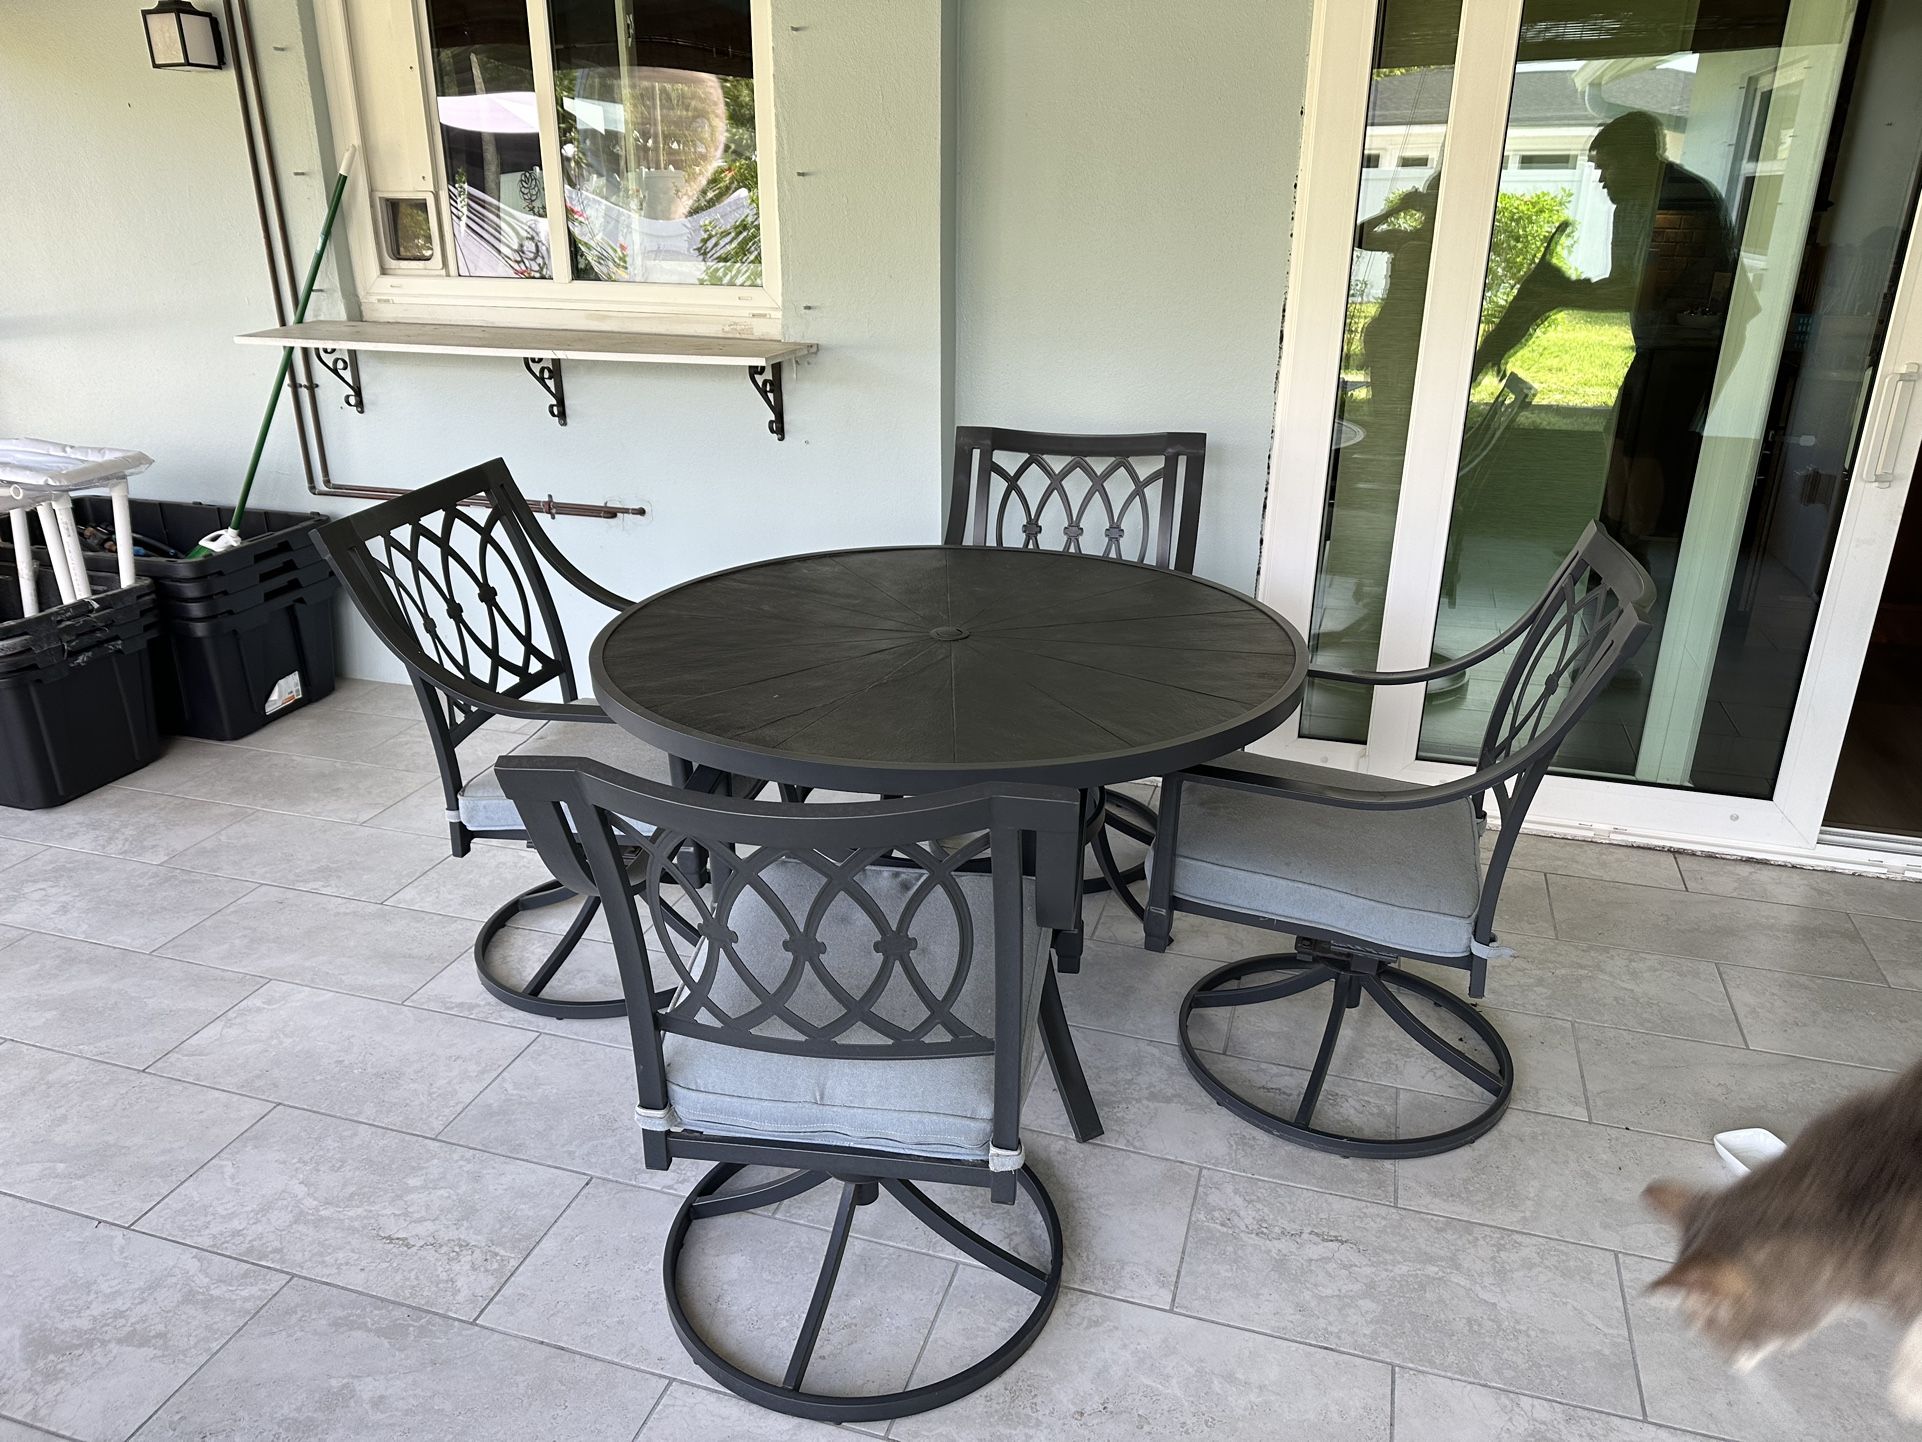 Set of Outdoor Table and  Chairs